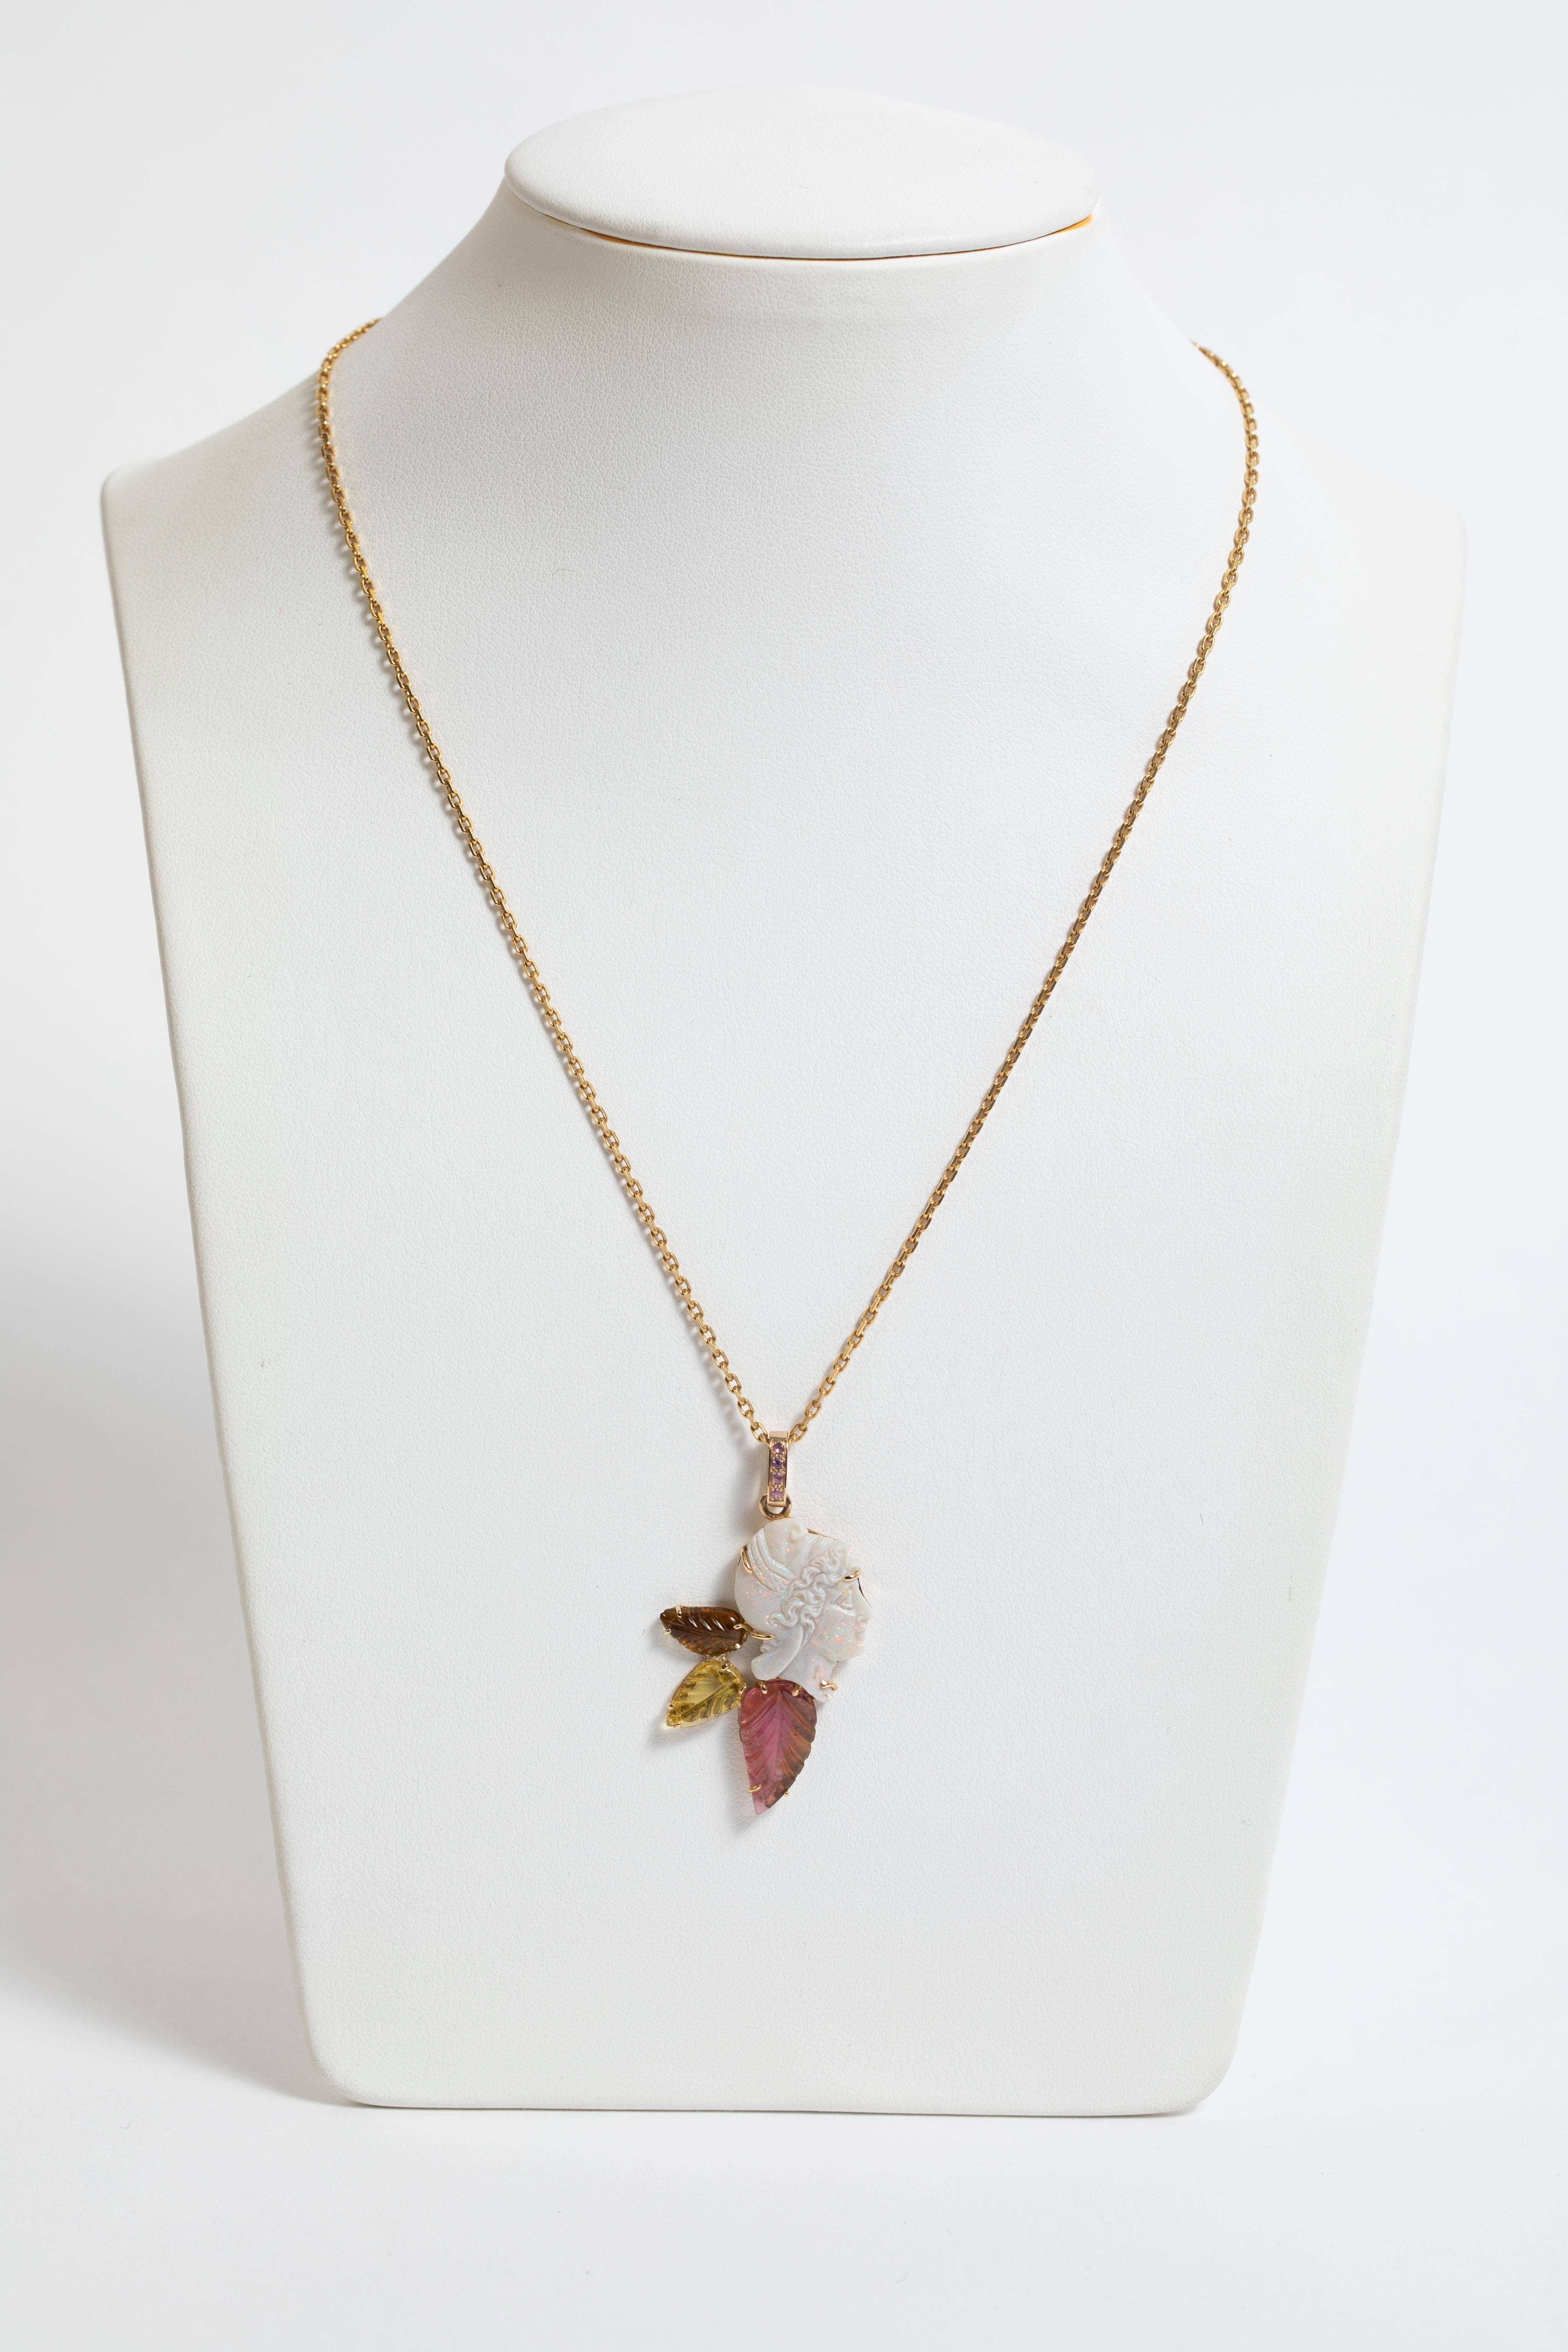 Created around the opal head, this unique necklace is georgous and luminous.
Opale head weight : 5,16 carats
3 engraved tourmalines leaf weight : 2,30 carats
Rubis on the belier : 0,05 carat
18K Yellow gold chain weight : 3,43 g 
Opale pendant :